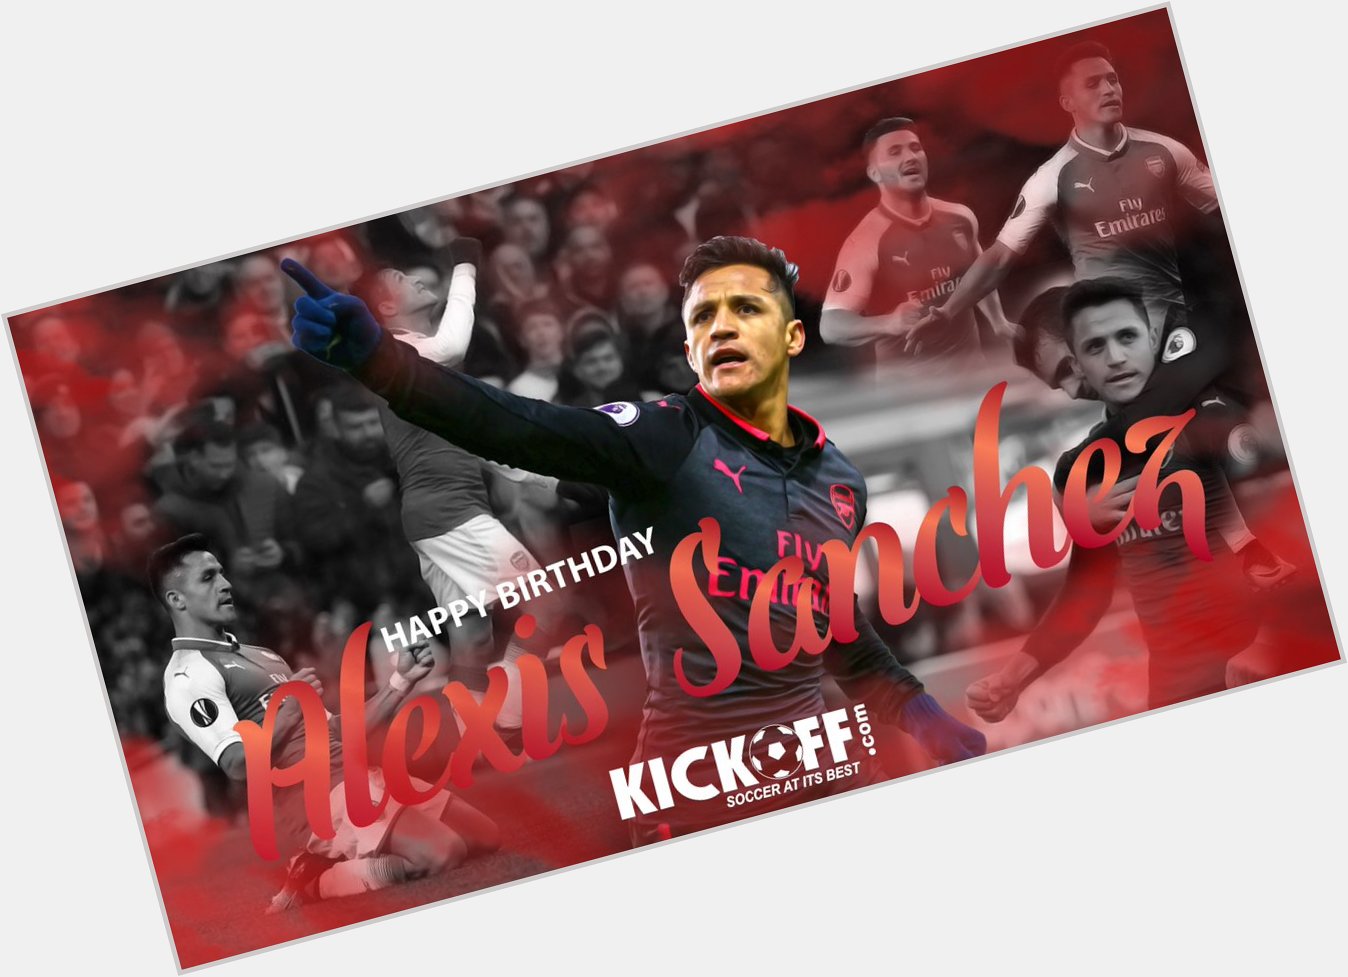 Arsenal s explosive attacker turns 29 today! Join in wishing Alexis Sanchez a Happy Birthday! 